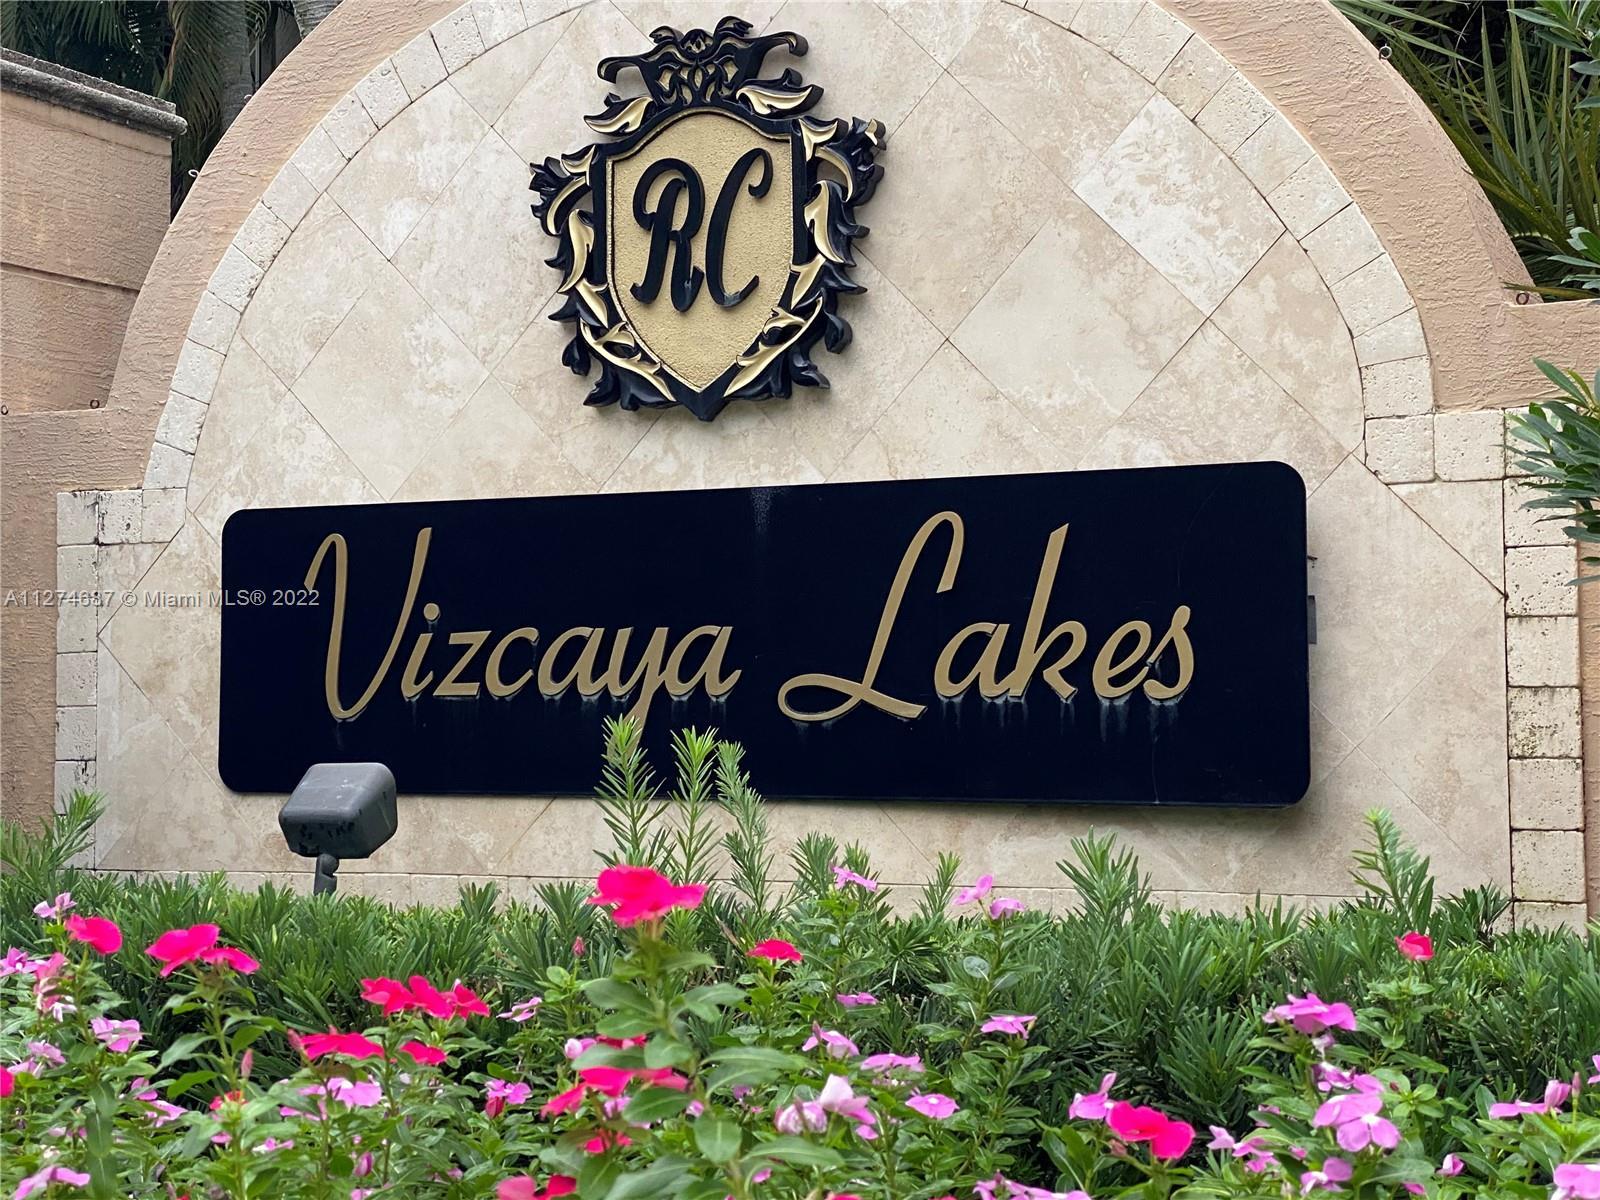 JUST REMODELED, beautiful and modern split plan condo in Vizcaya Lakes. NO CARPET- SS appliances. La